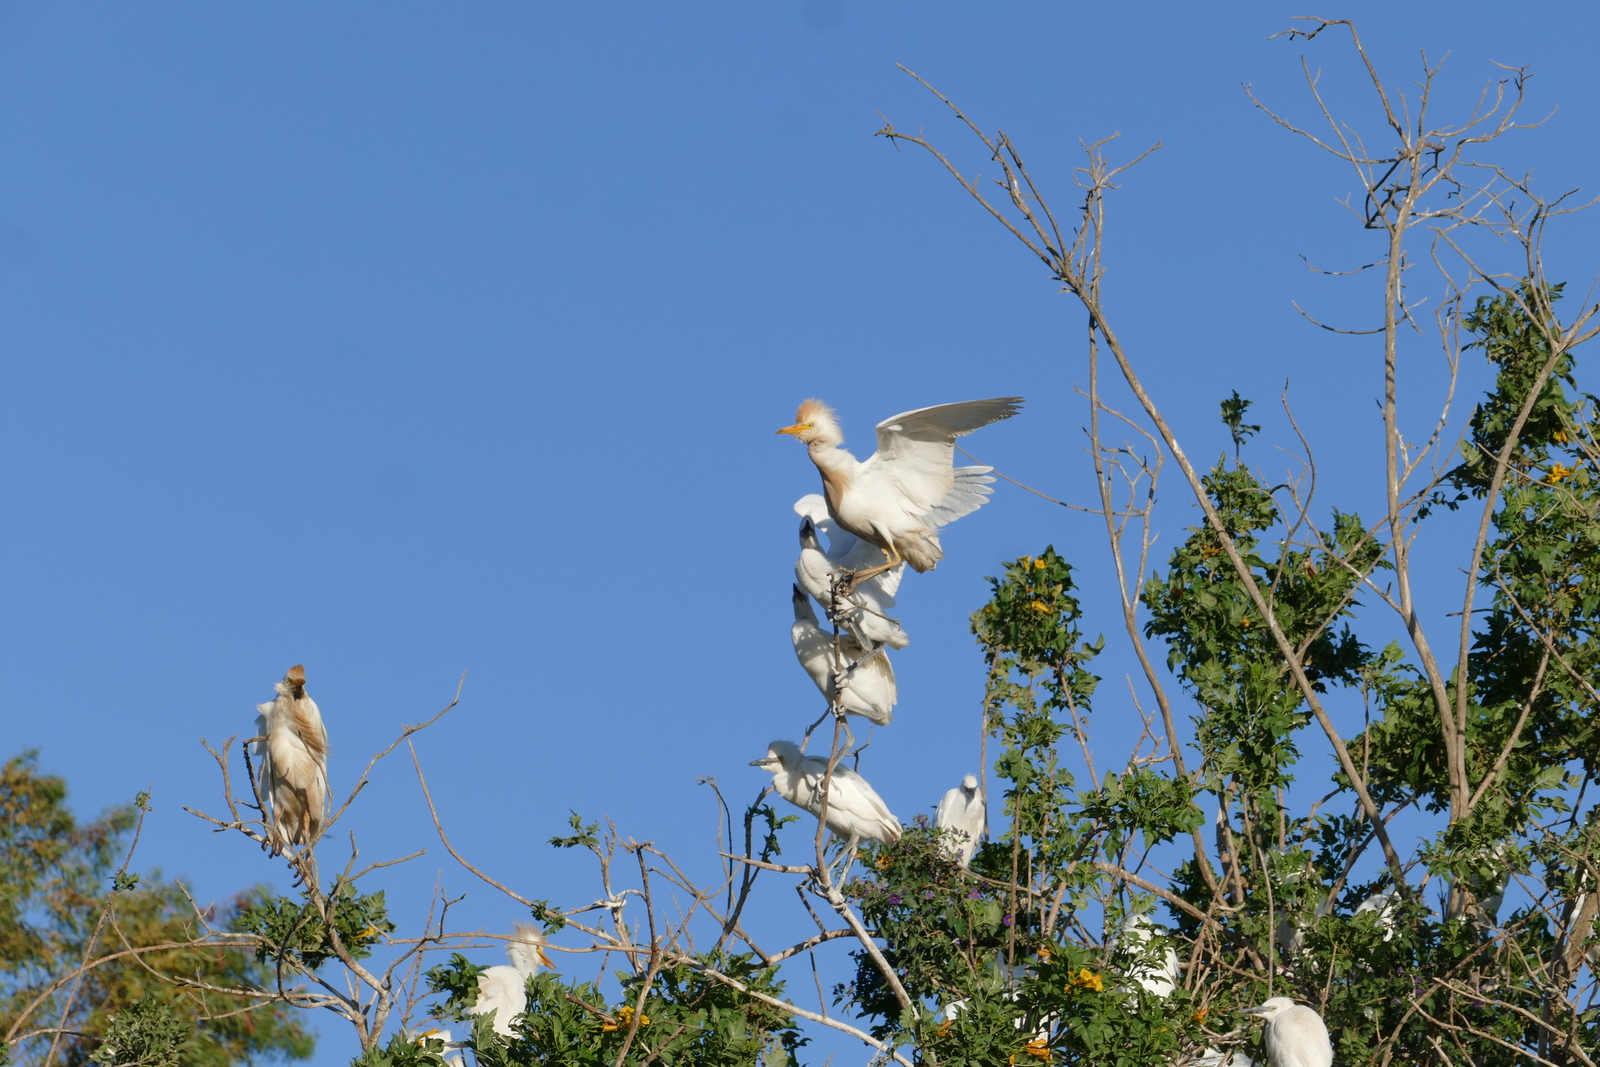 Cattle Egret Nesting Colony in the Lower Galillee (Sakhnin) April 2018